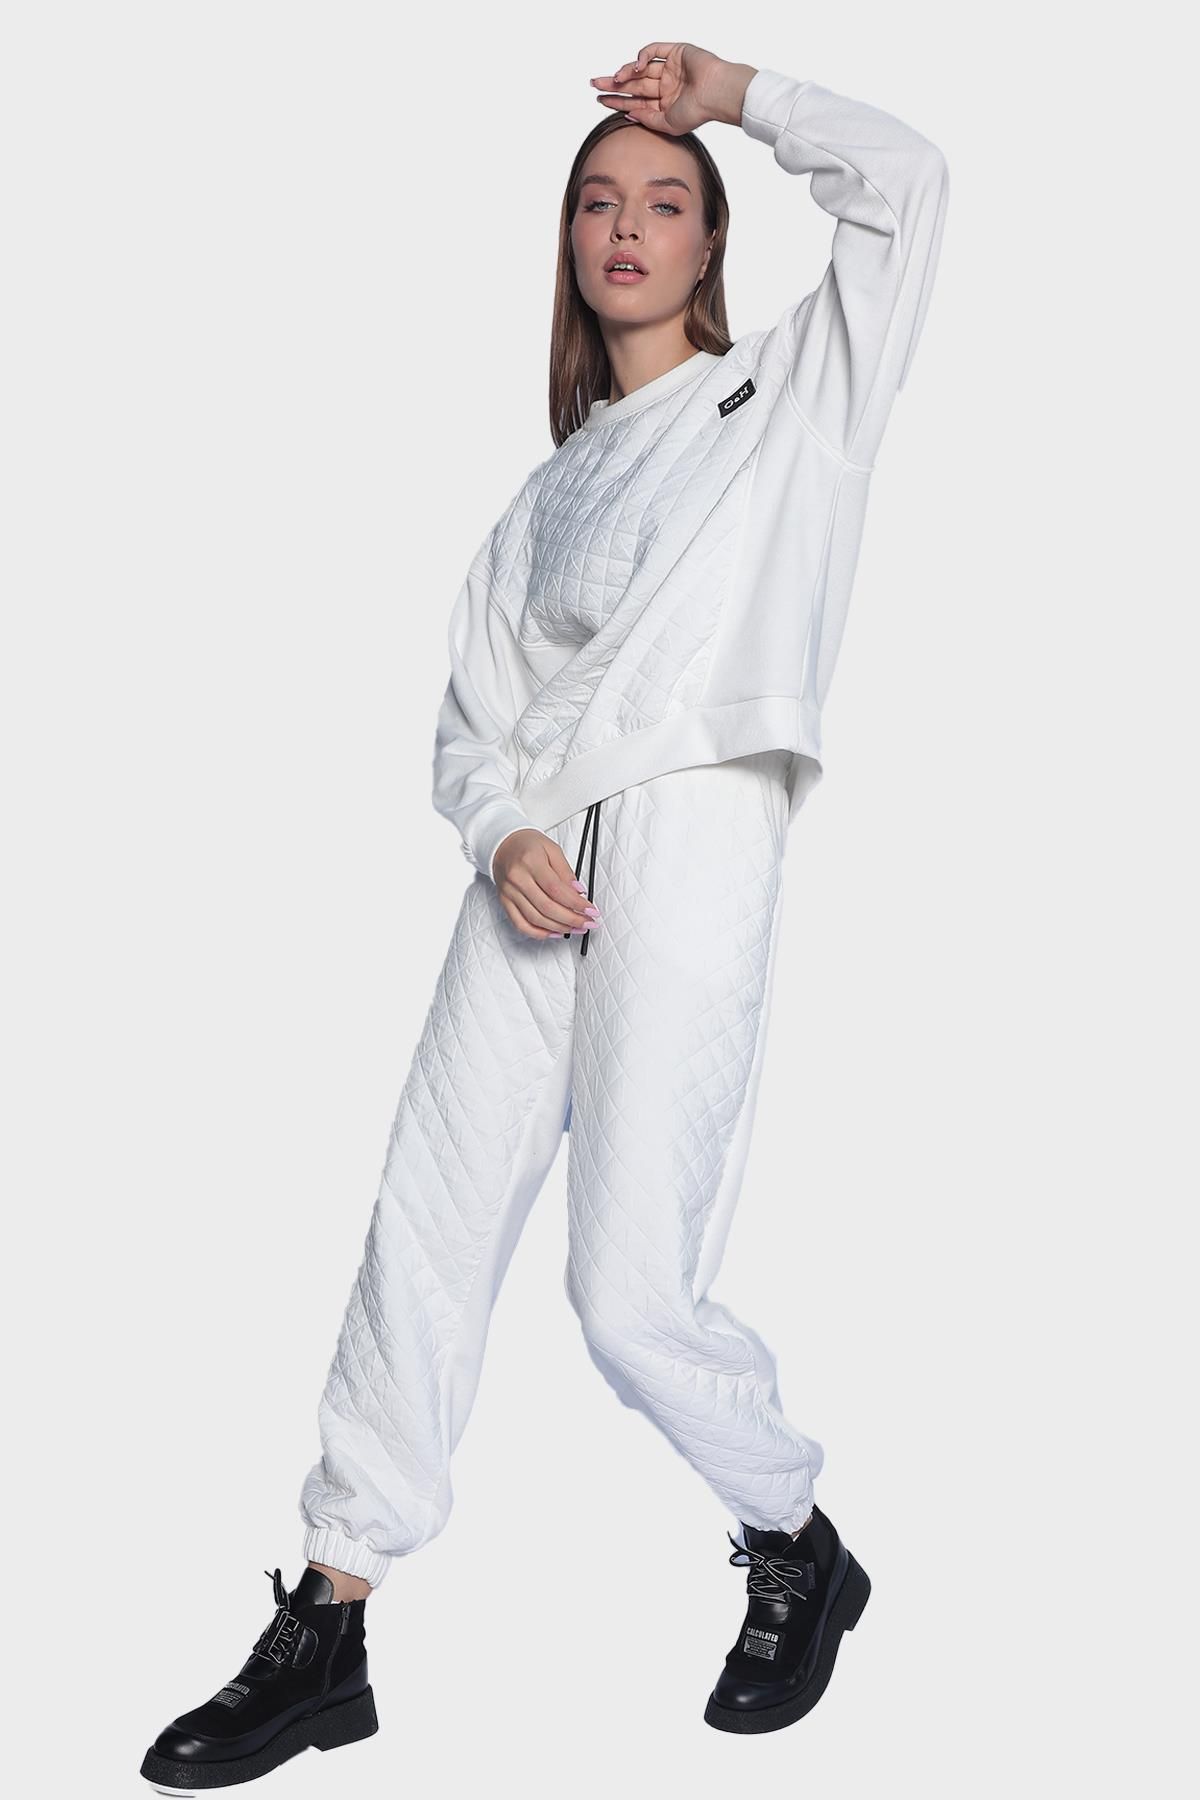 Womens Sports Style Quilted Sweatshirt and Sweatpants Set - White